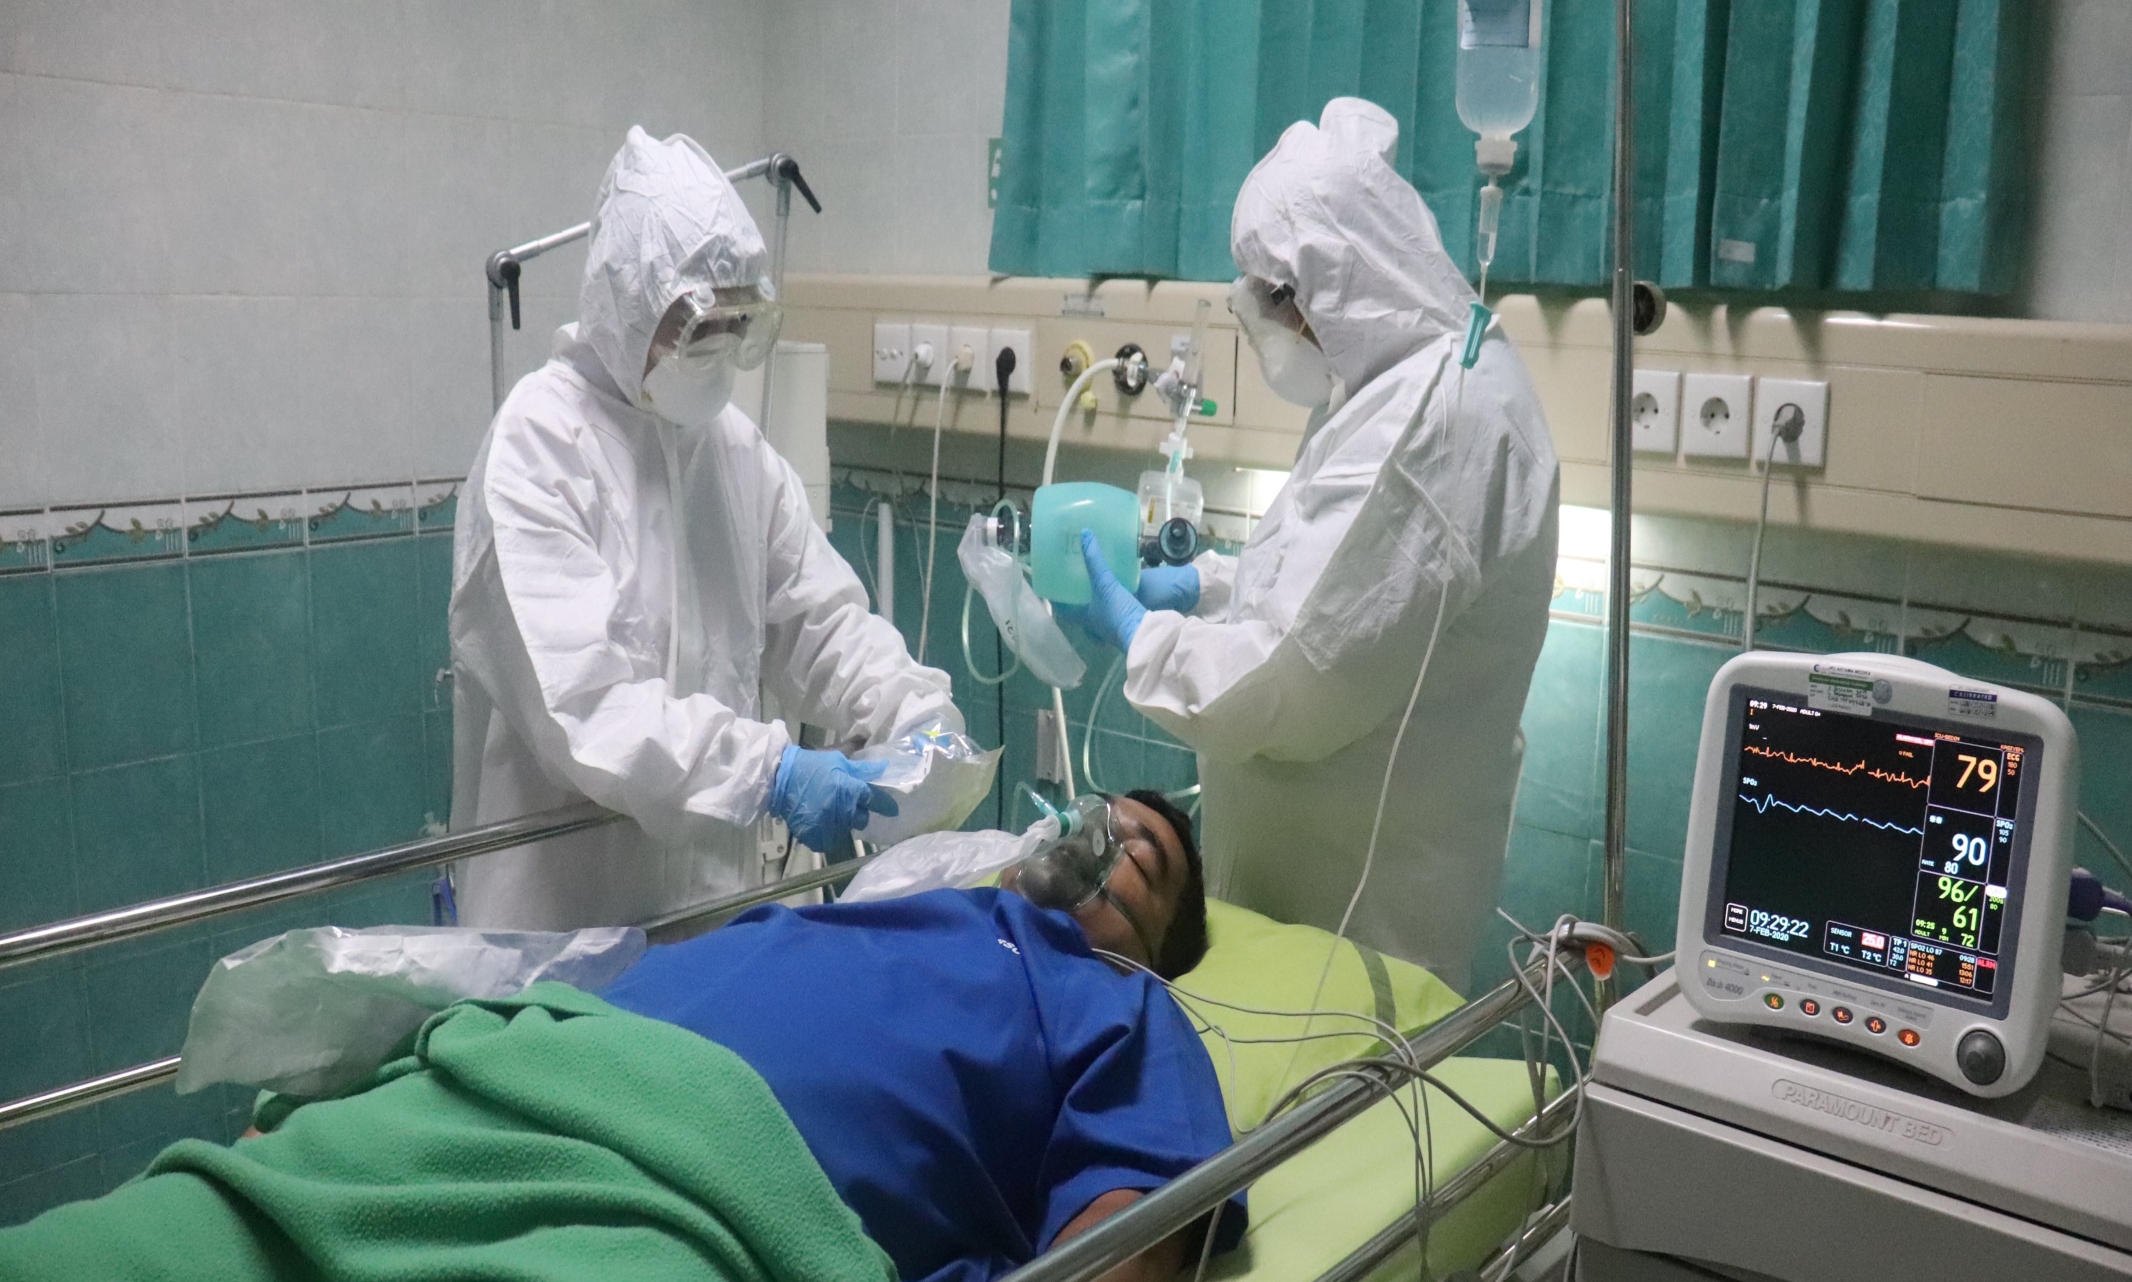 Medical workers treat a COVID-19 patient